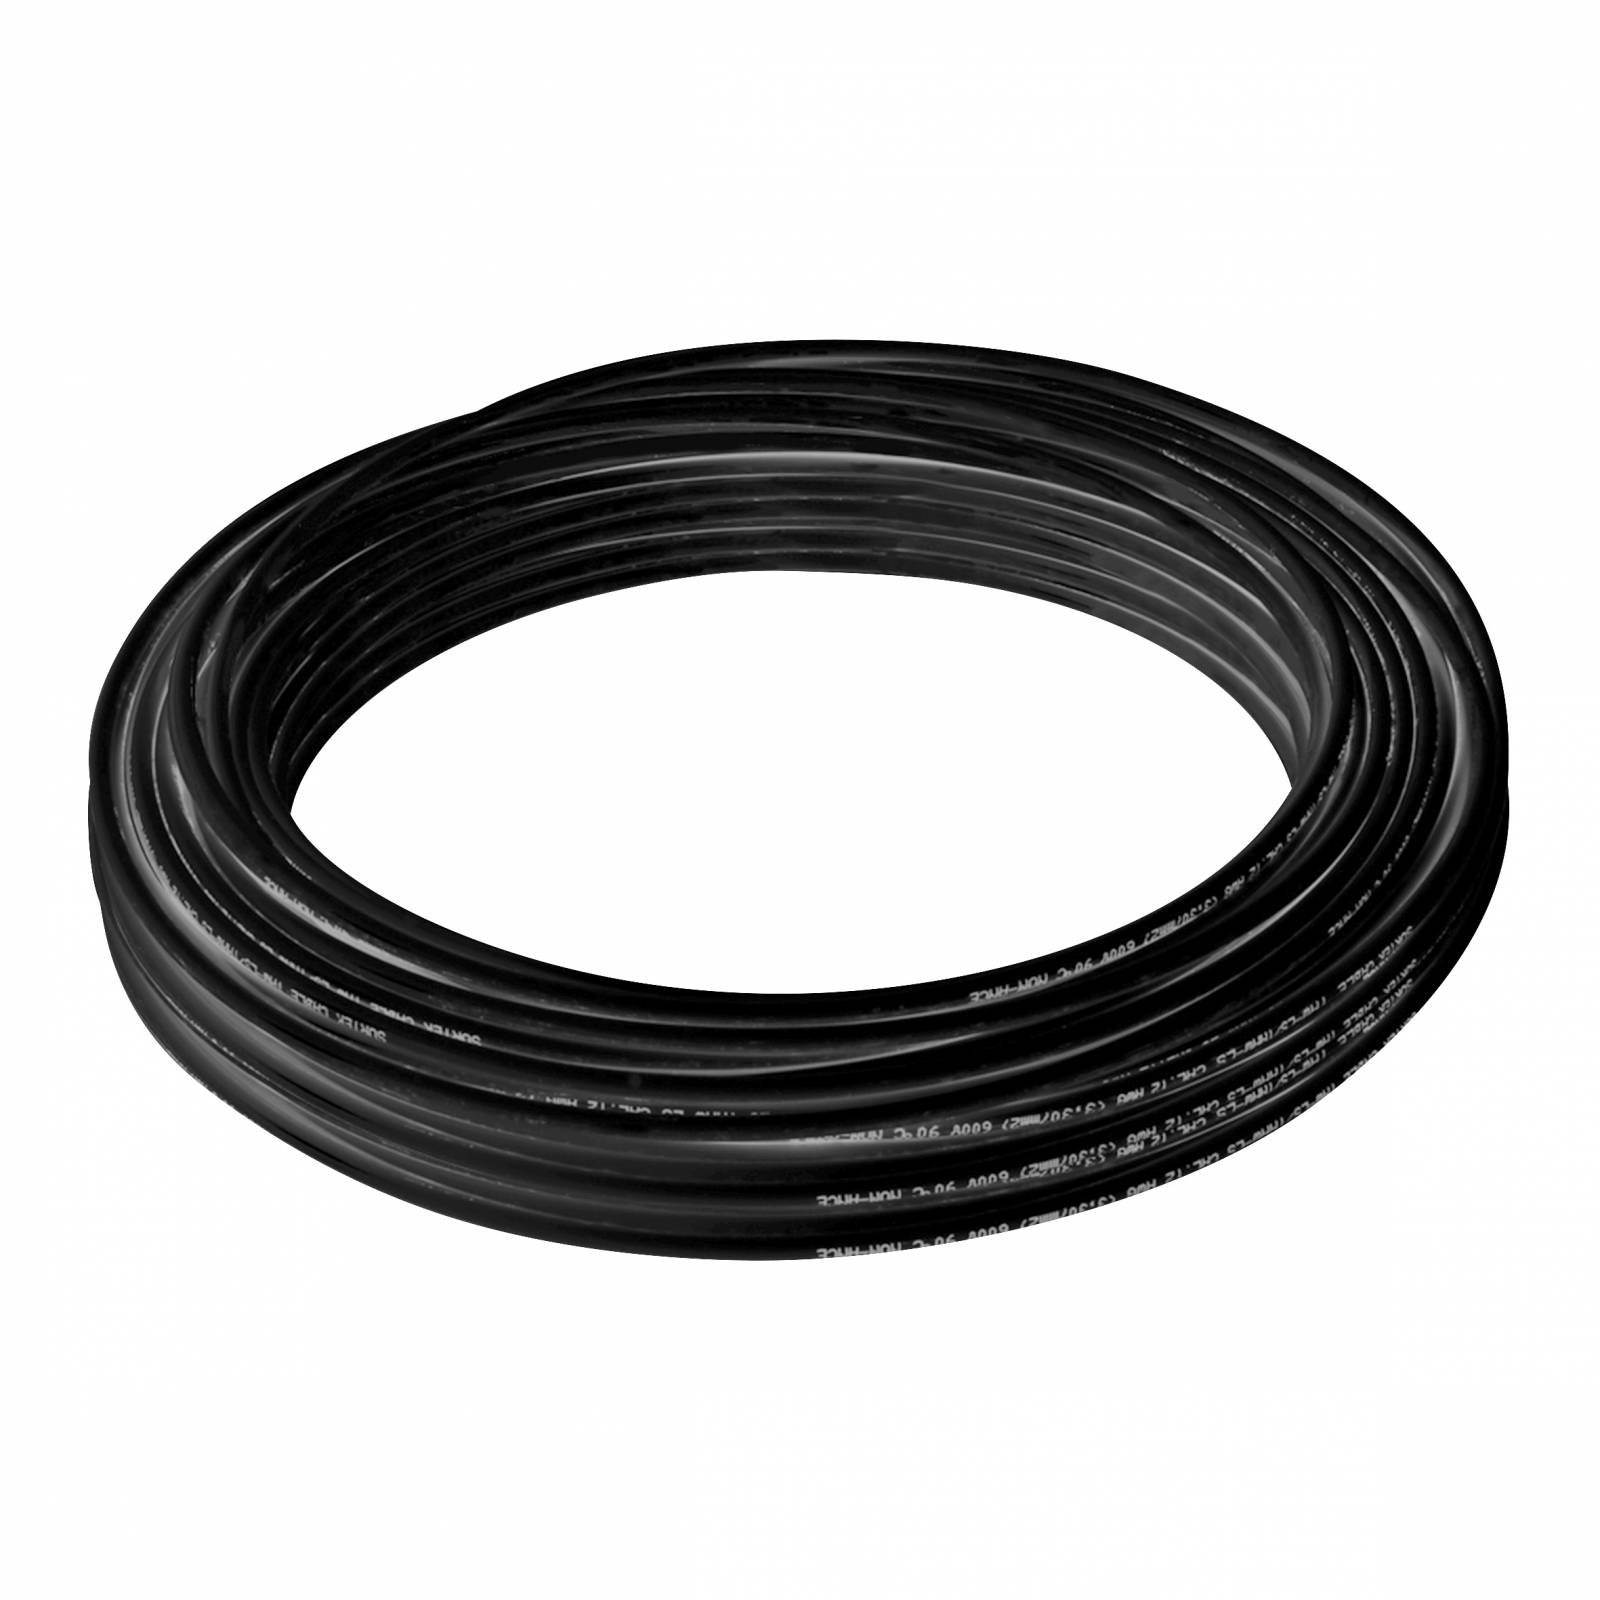 Cable Eléctrico Tipo Thw-ls/thhw-ls Cal.12 100m Negro 136918 